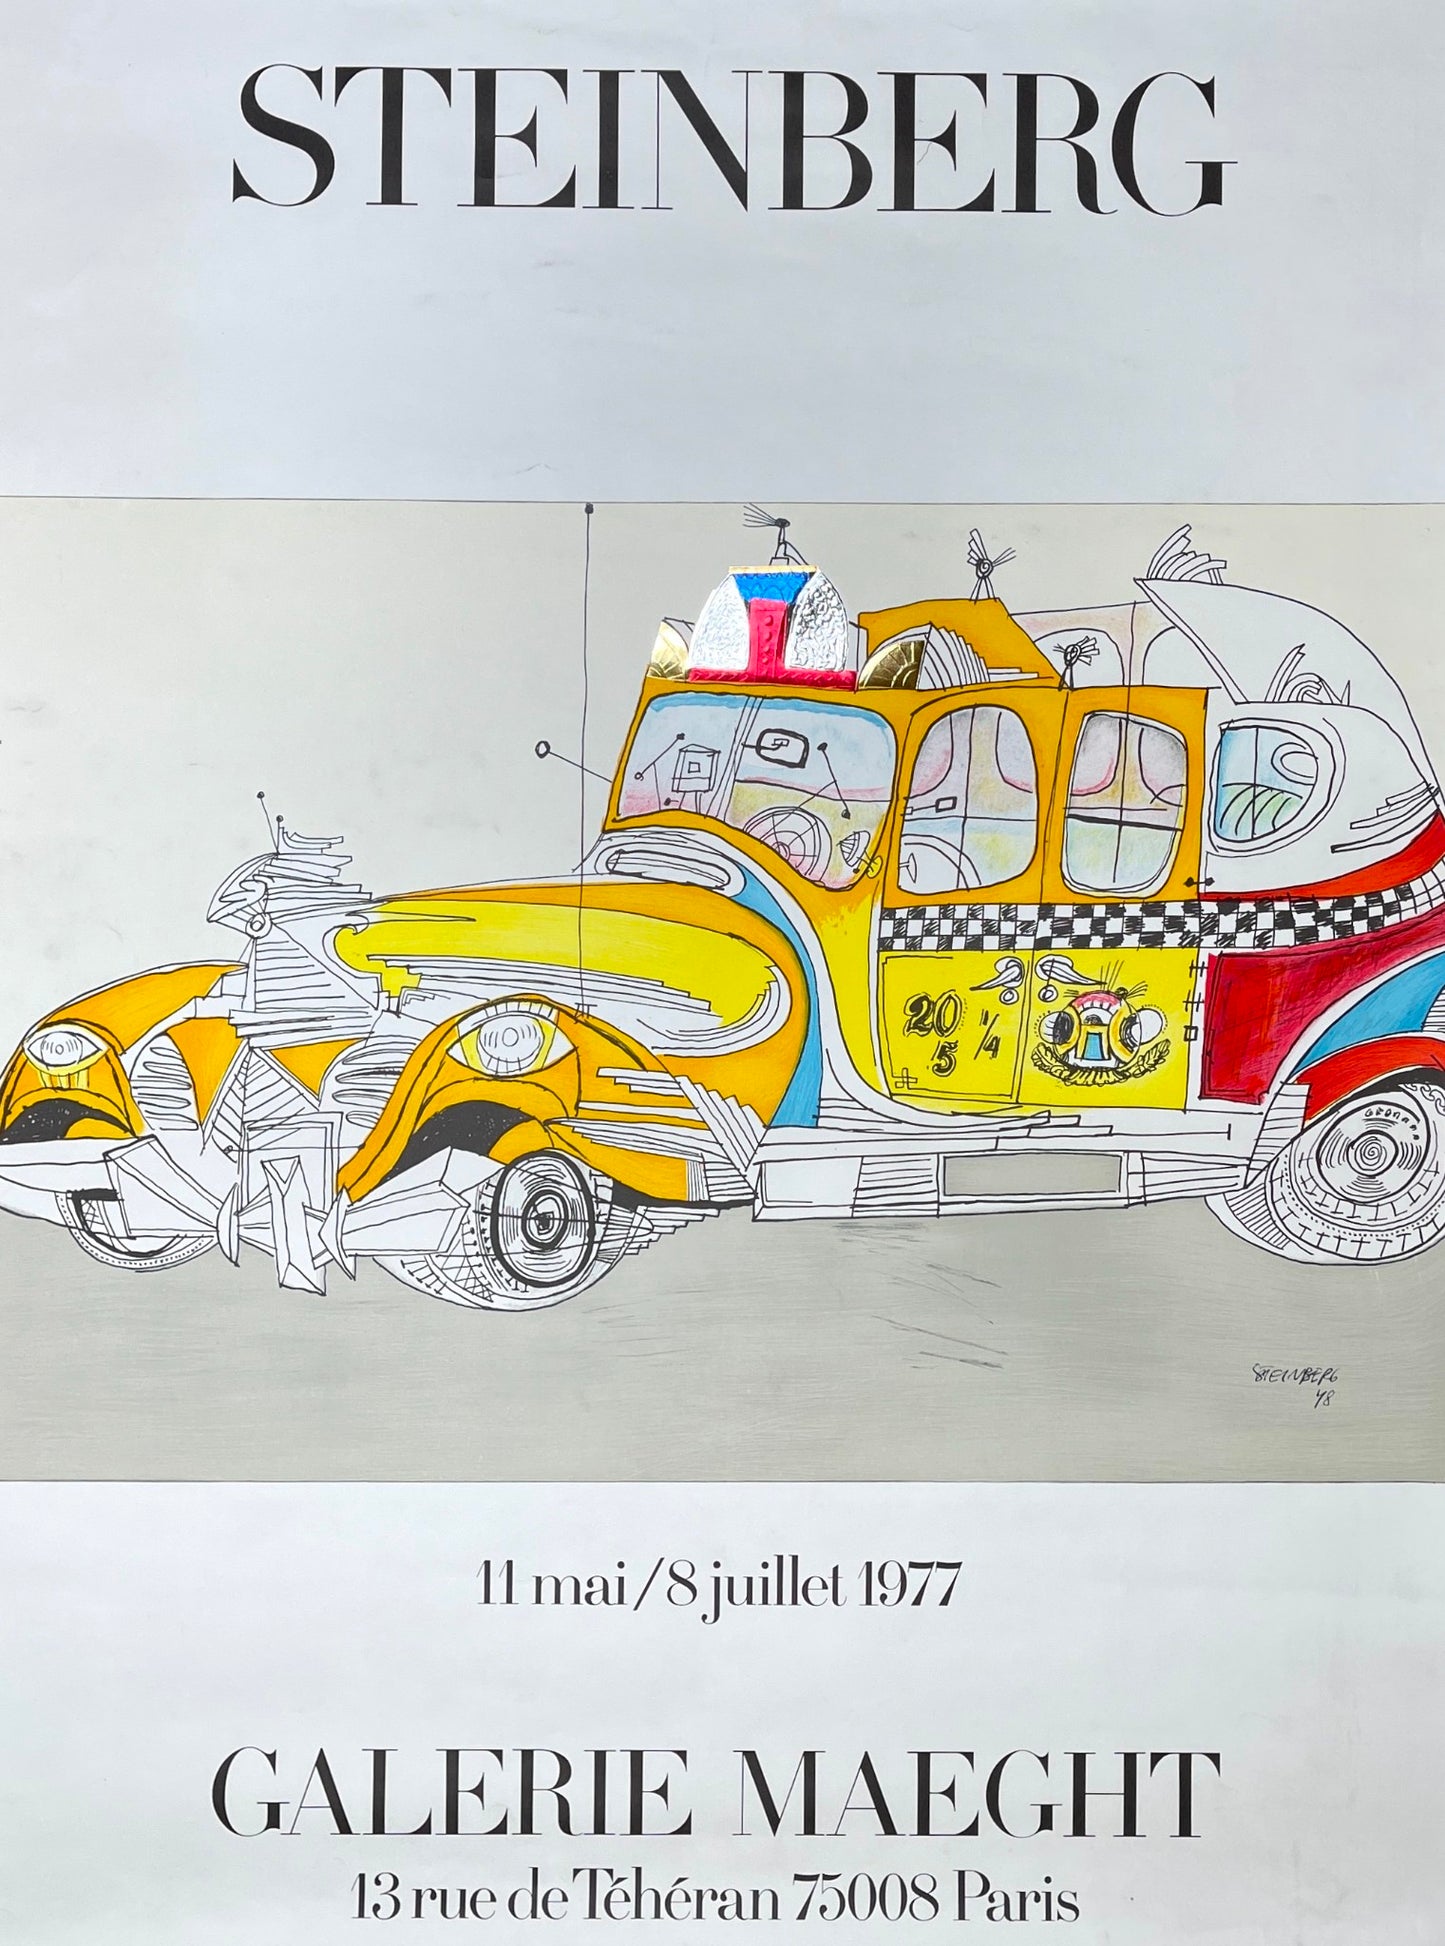 Exhibition Poster - Saul Steinberg - Taxi Drawing - Galerie Maeght Paris 1977 - Dahlströms Fine Art